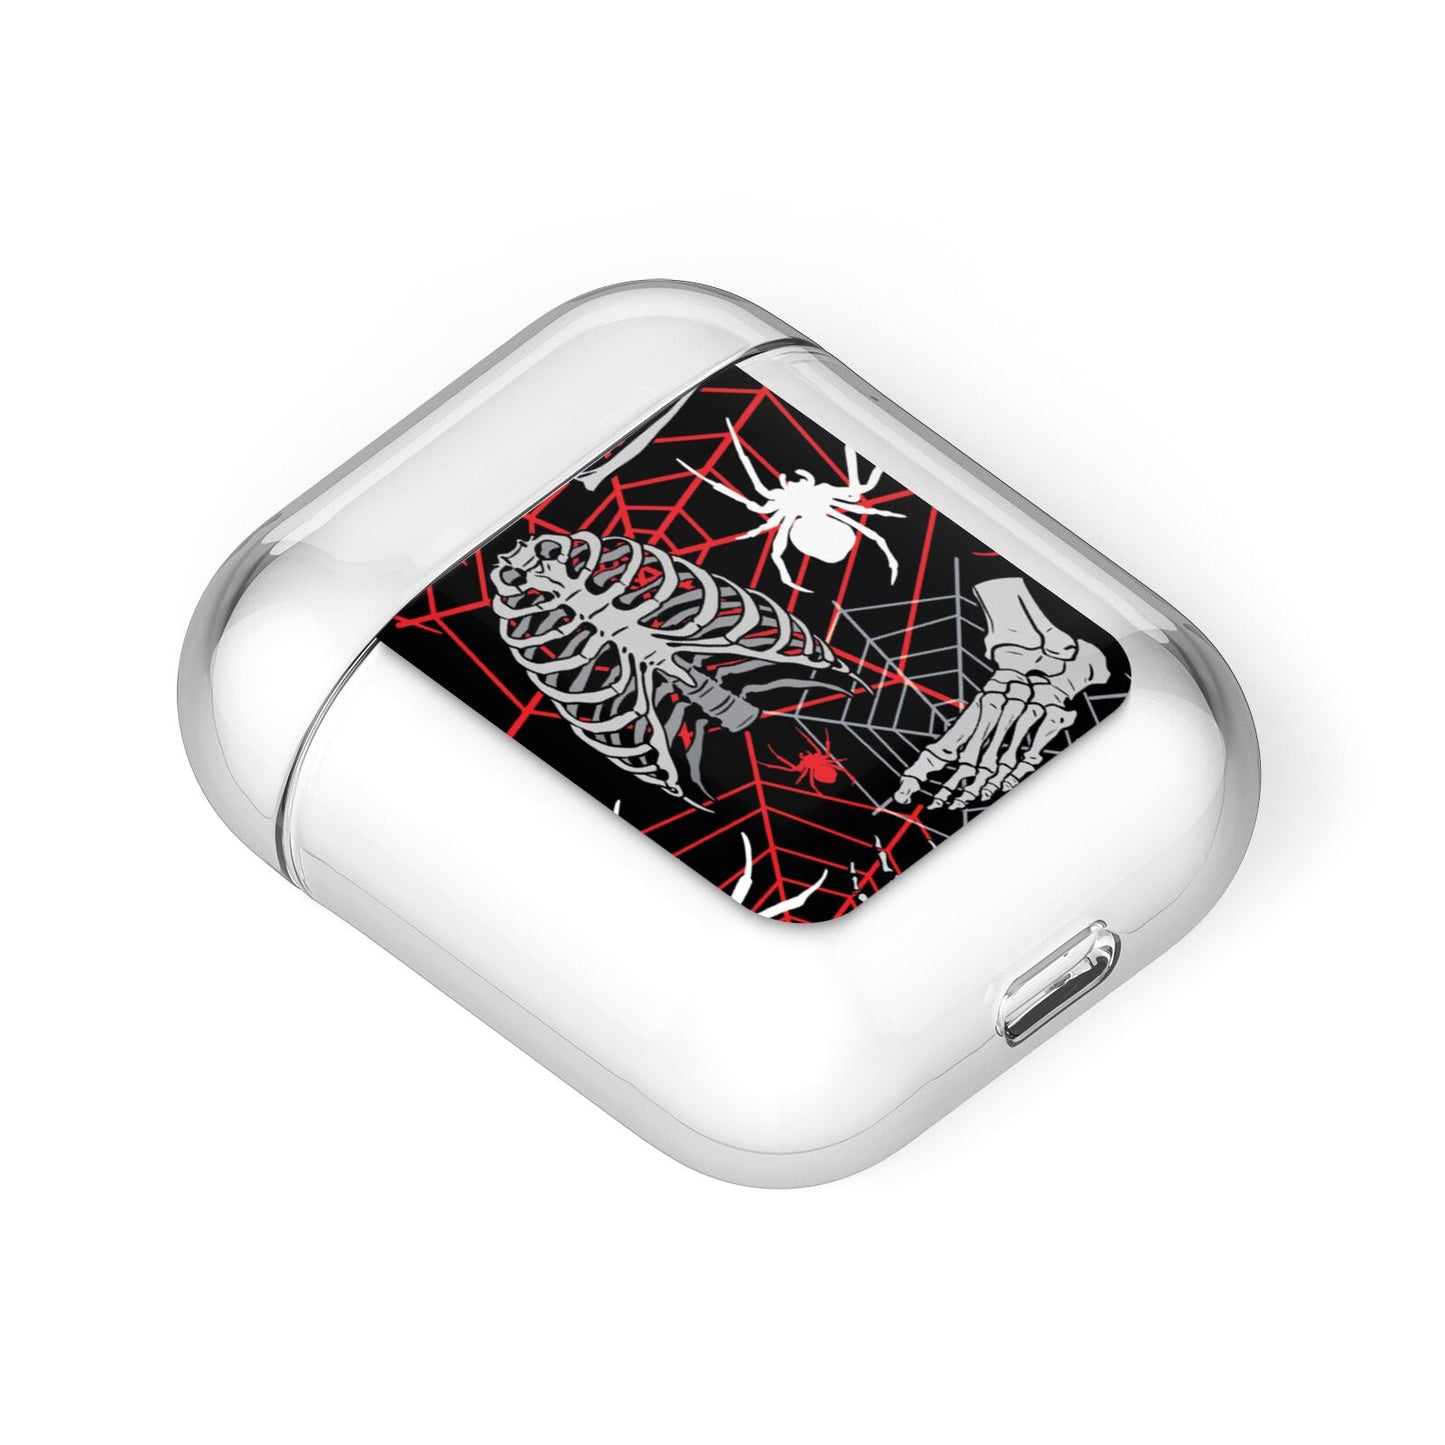 Grey and Red Cobwebs AirPods Case Laid Flat